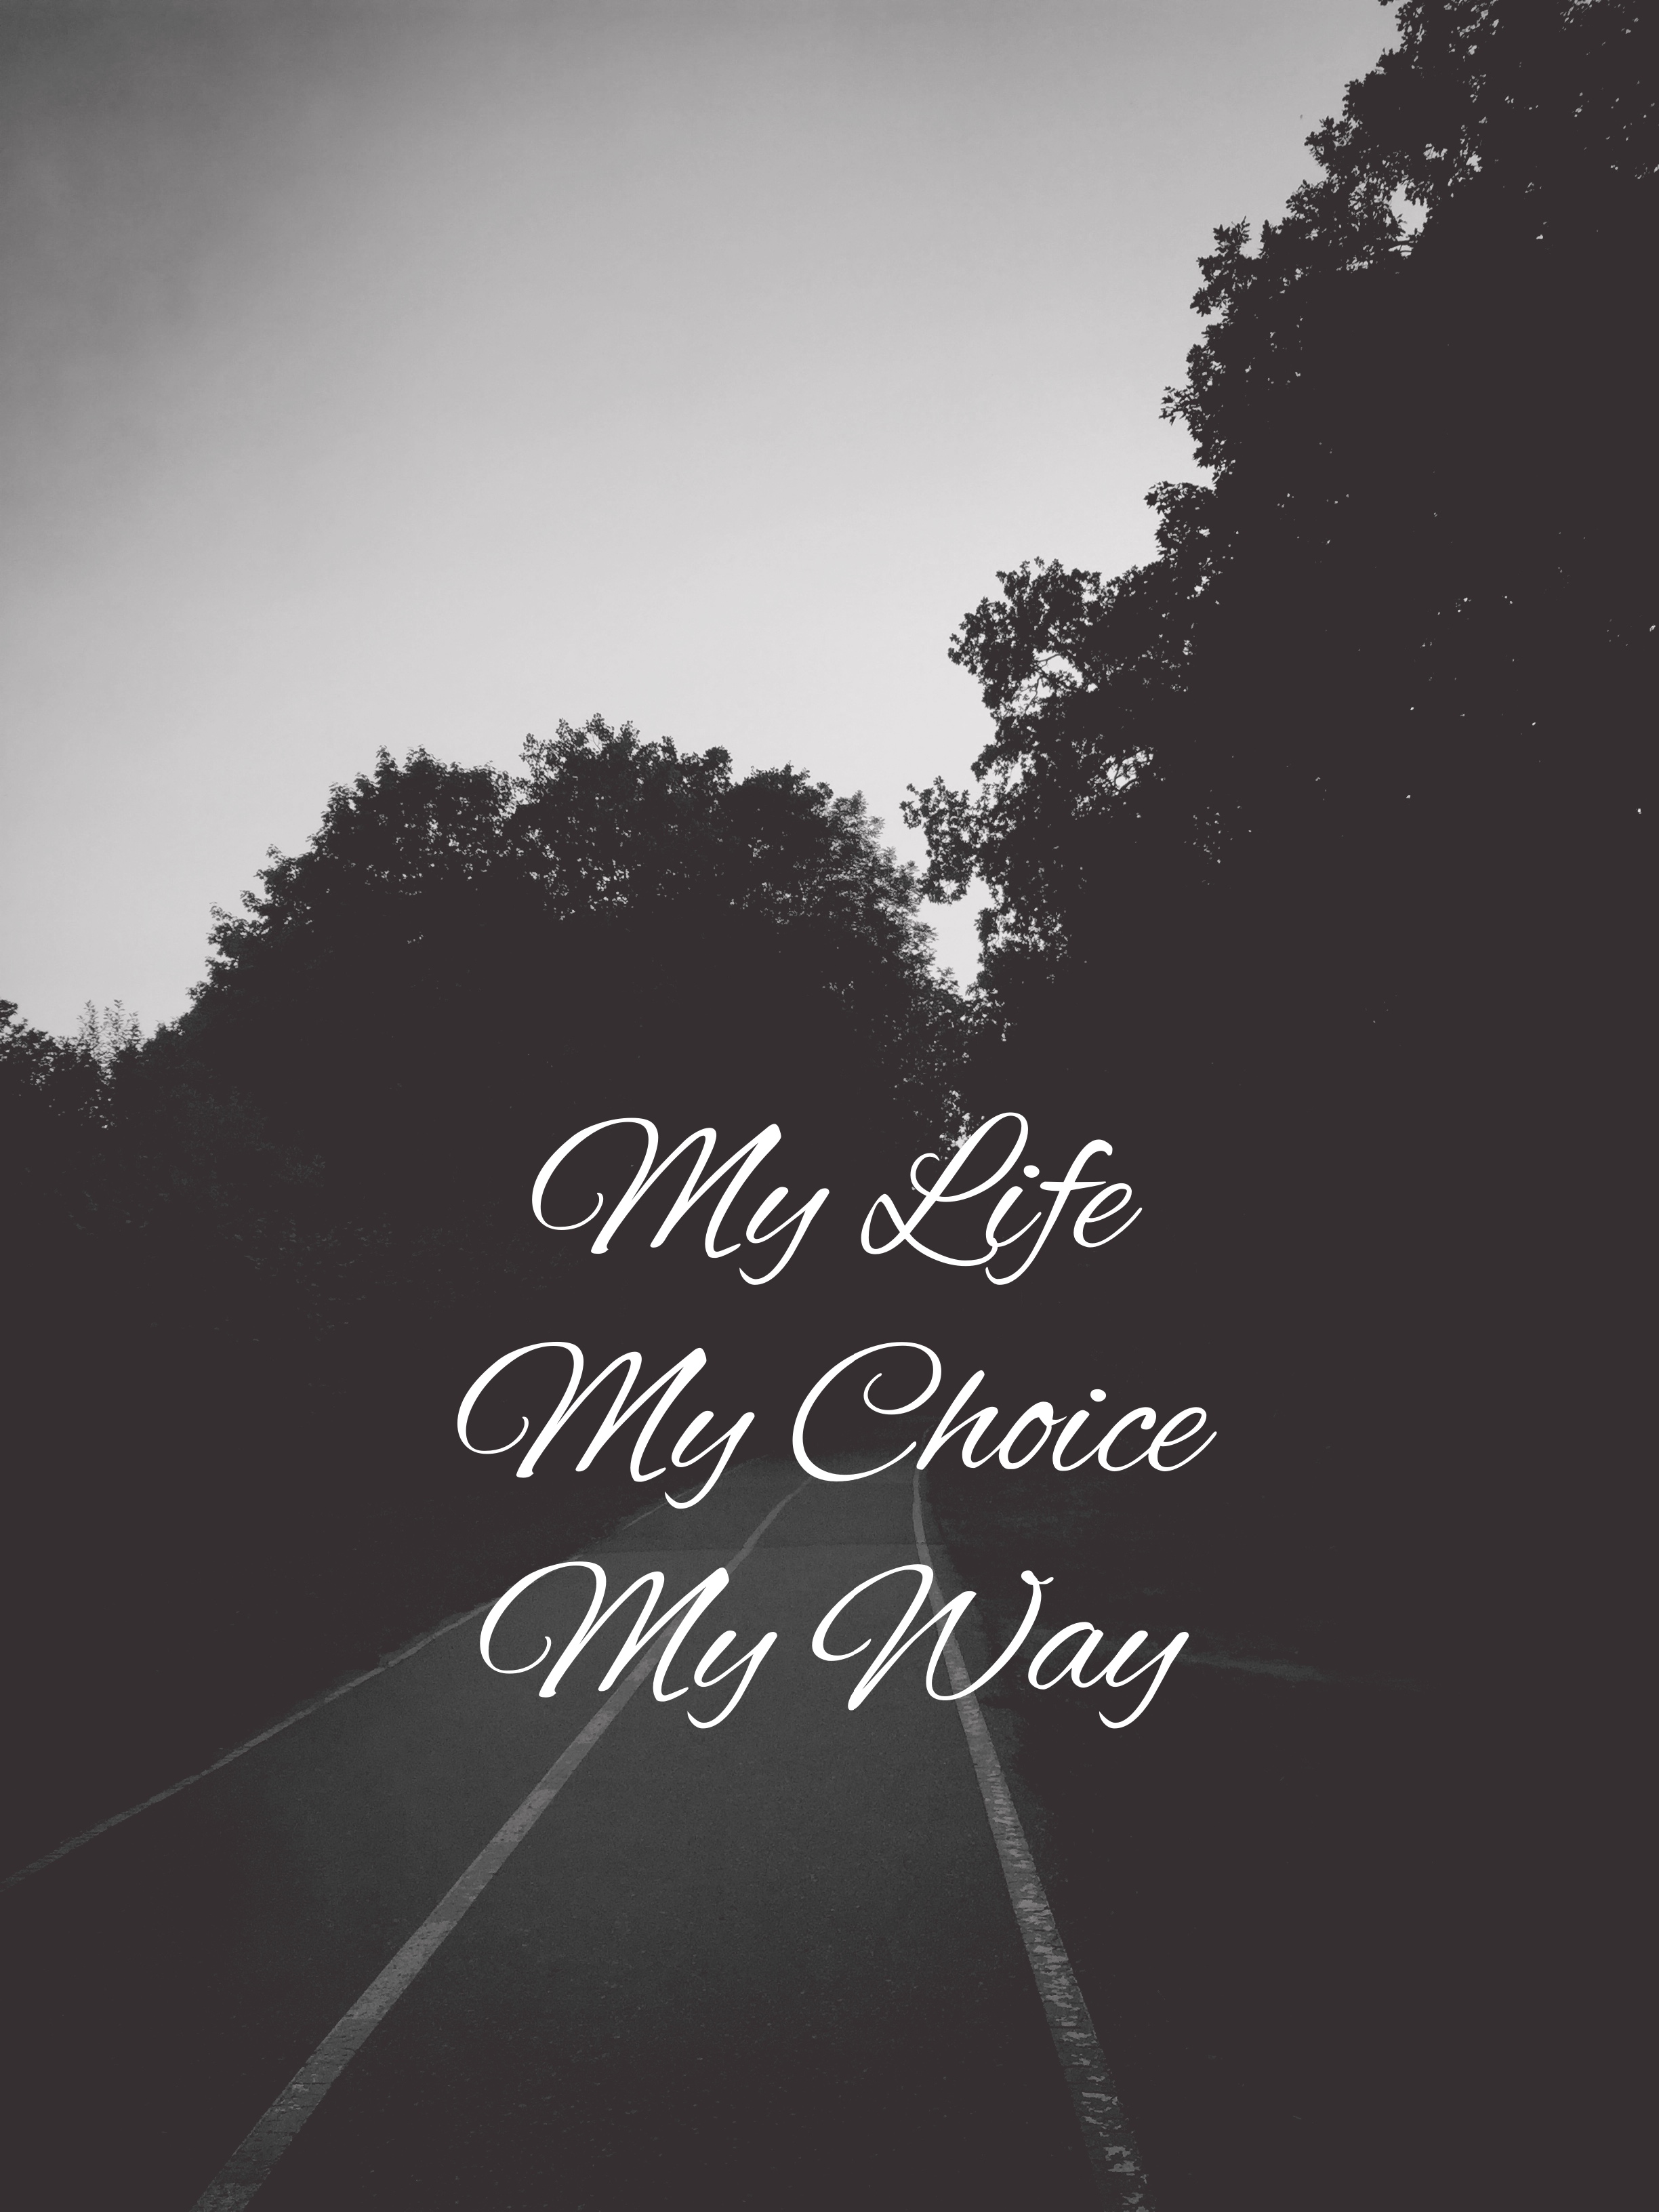 bw, words, text, quotation, quote, chb, inscription, road, path, way phone wallpaper